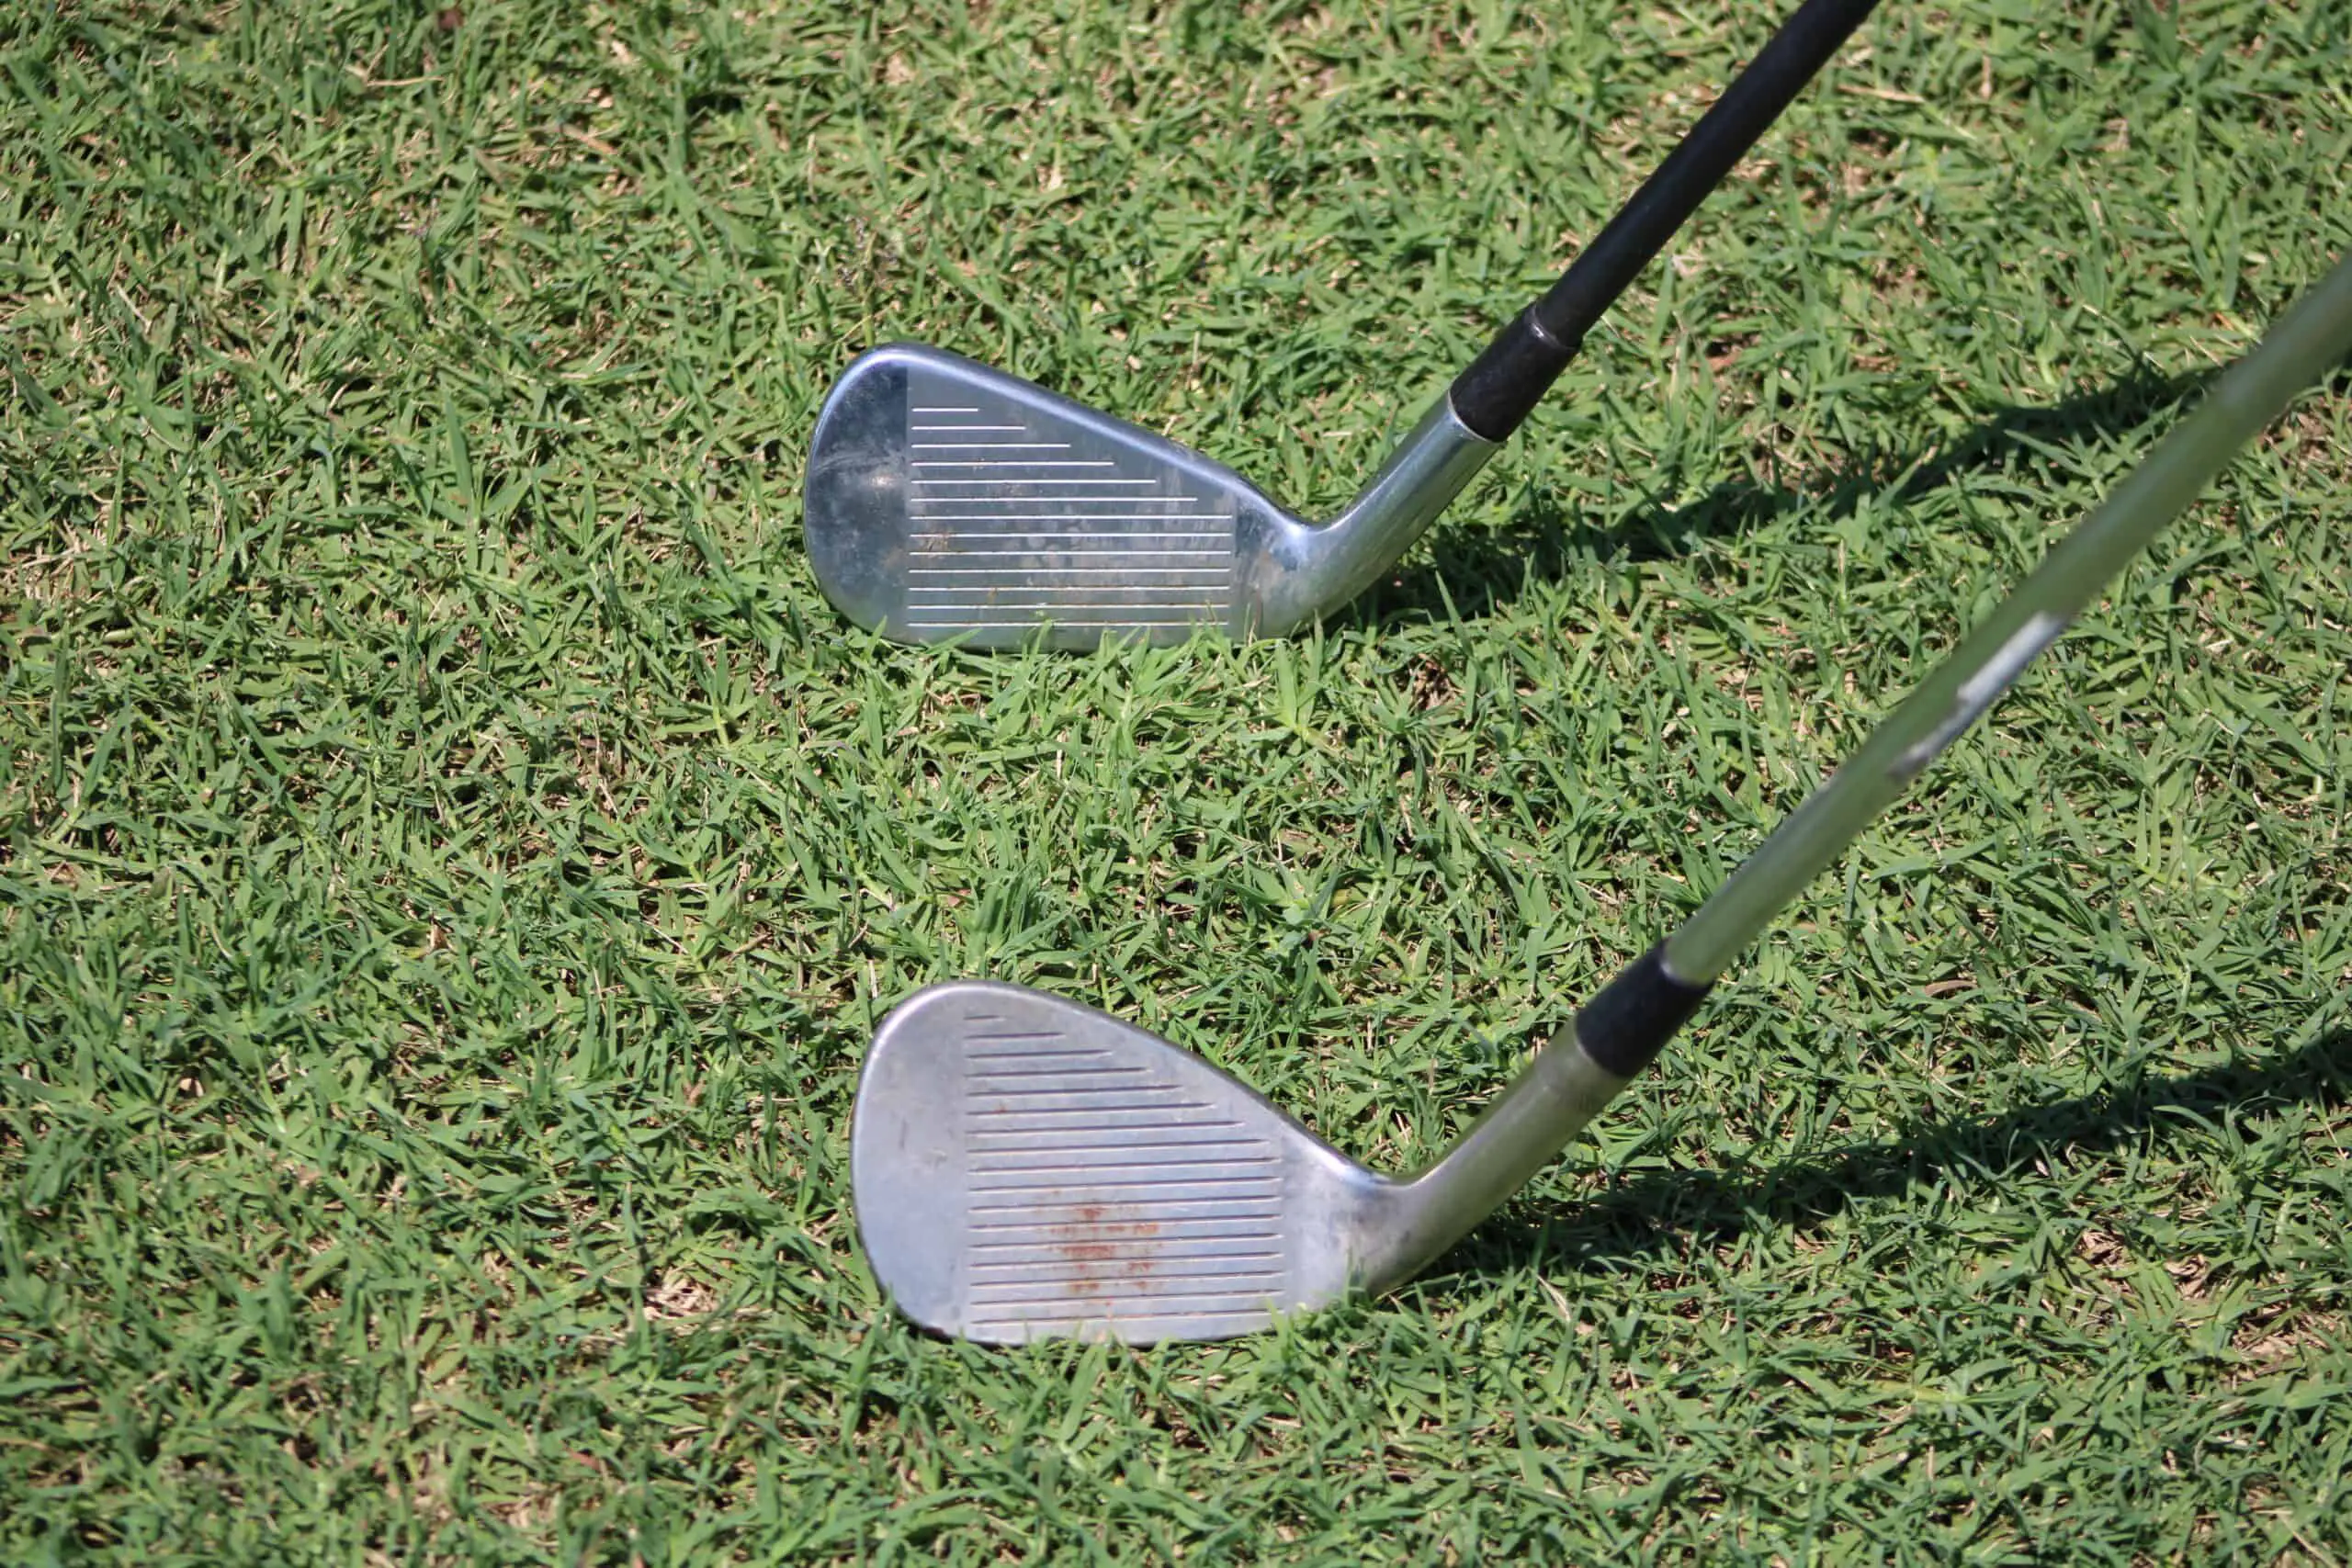 Lob Wedge vs Approach Wedge [Choosing the Right Wedge for Your Golf Game]